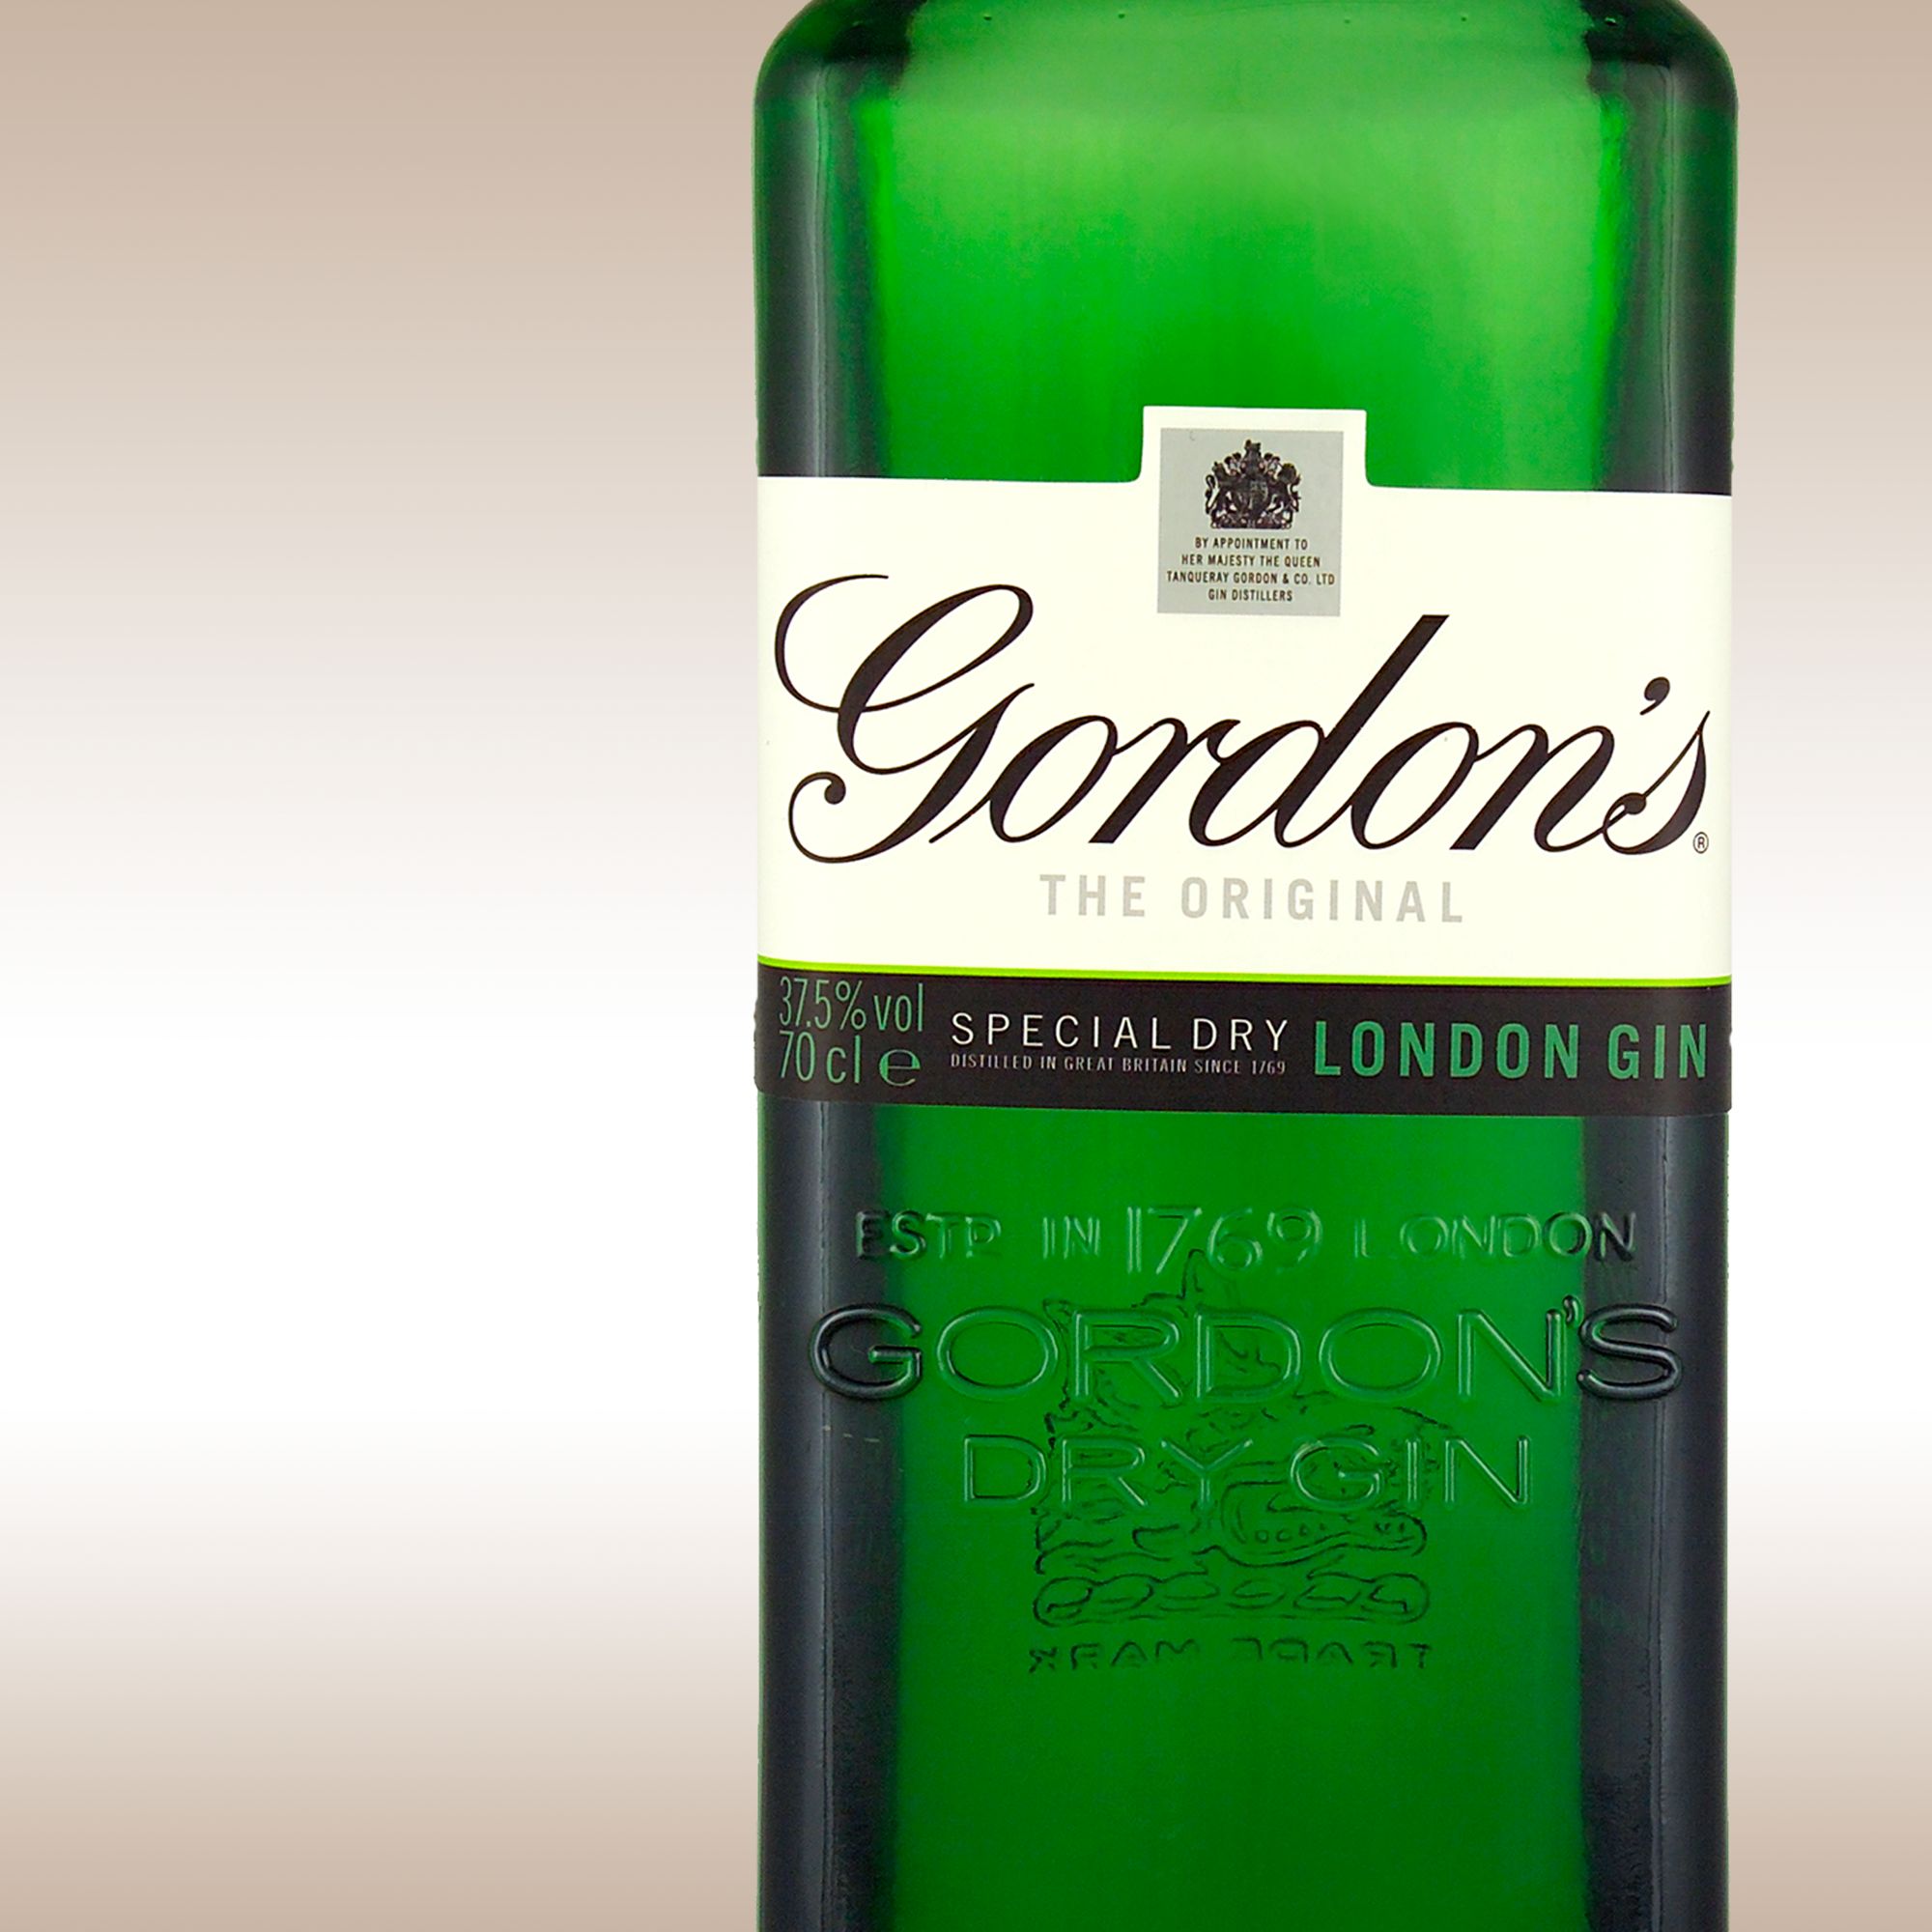 Gordon's Special Dry London Gin at JohnLewis